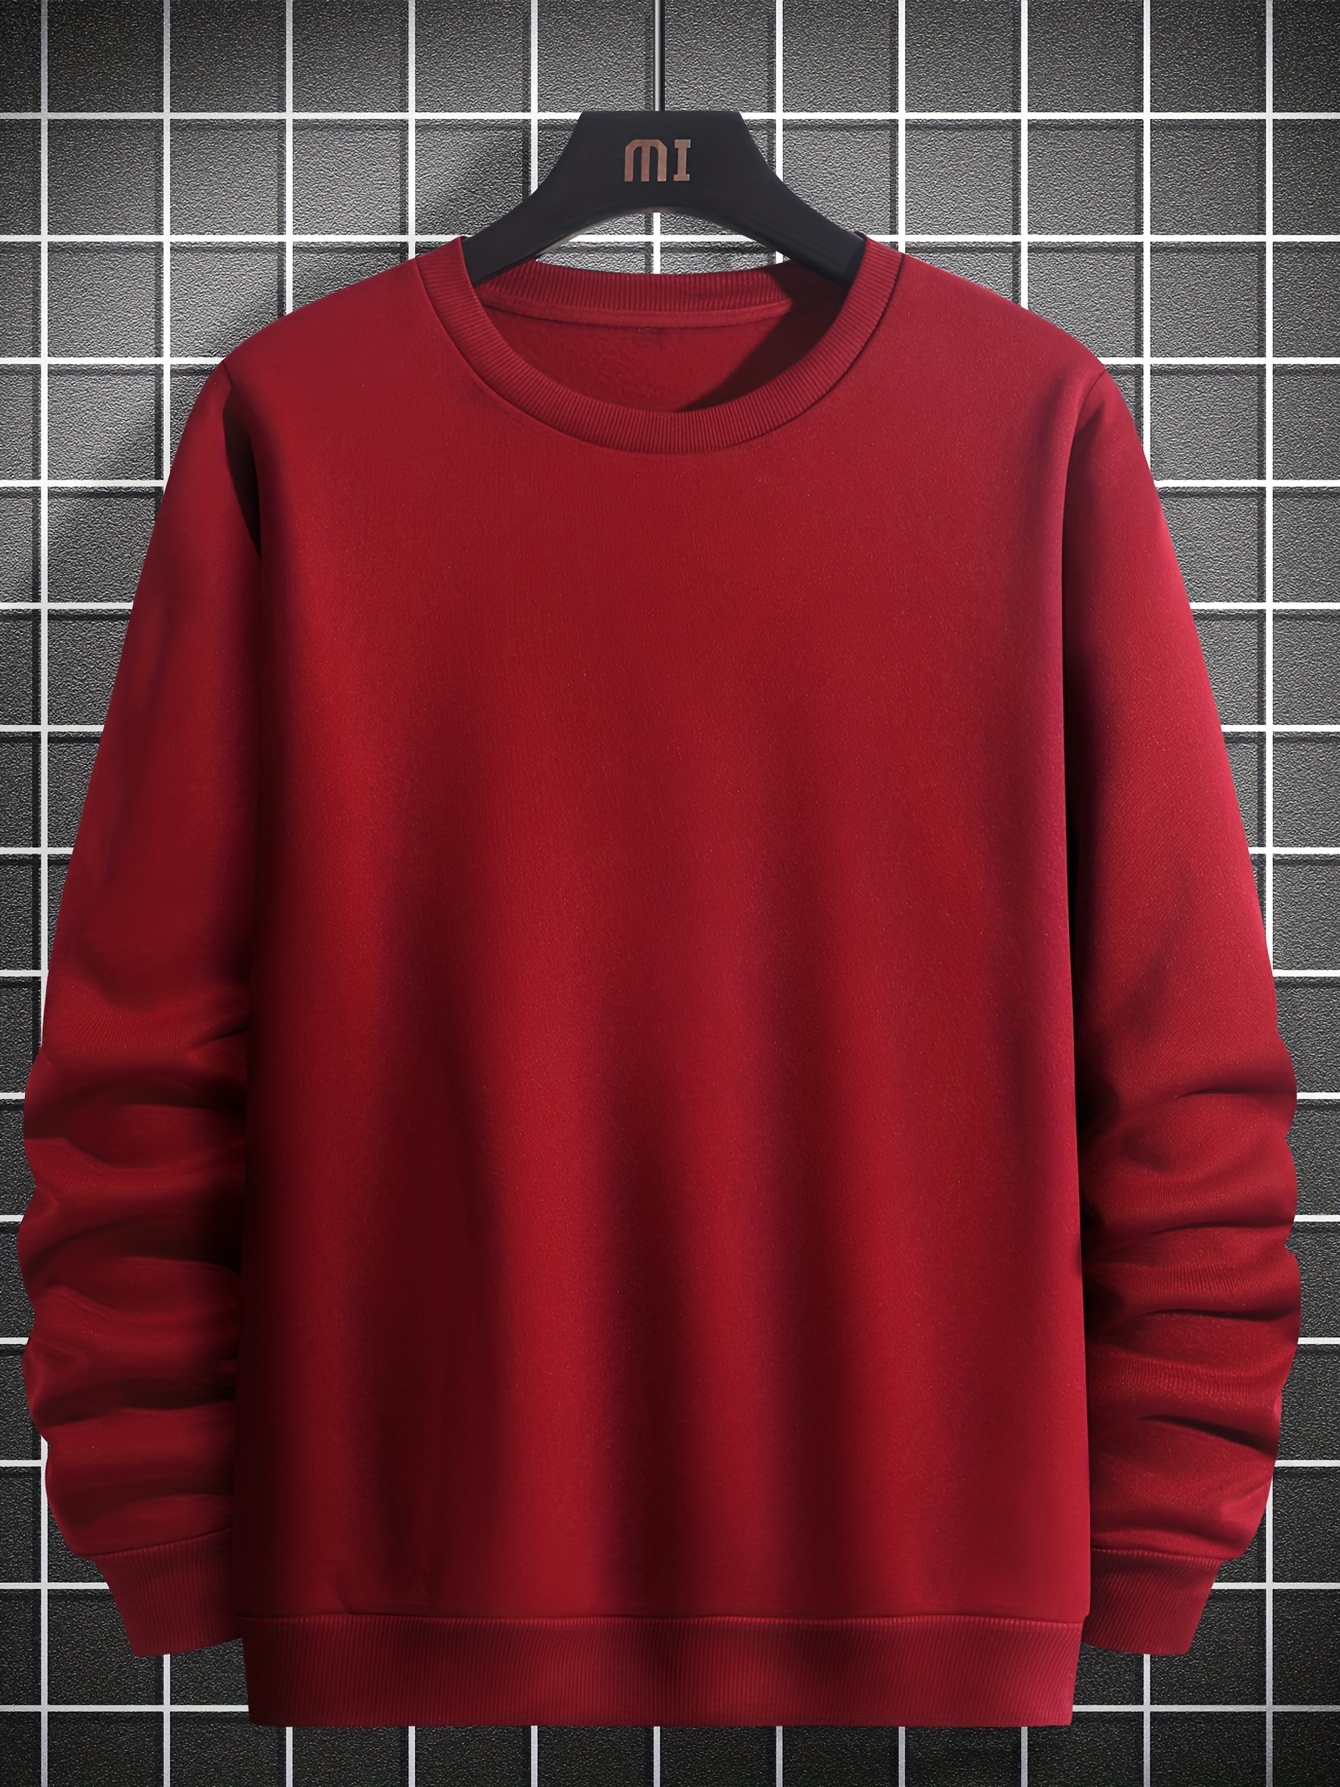 MENS NEXT LARGE MAROON MARL CREW NECK PATTERNED CASUAL PULL OVER SWEATER  JUMPER